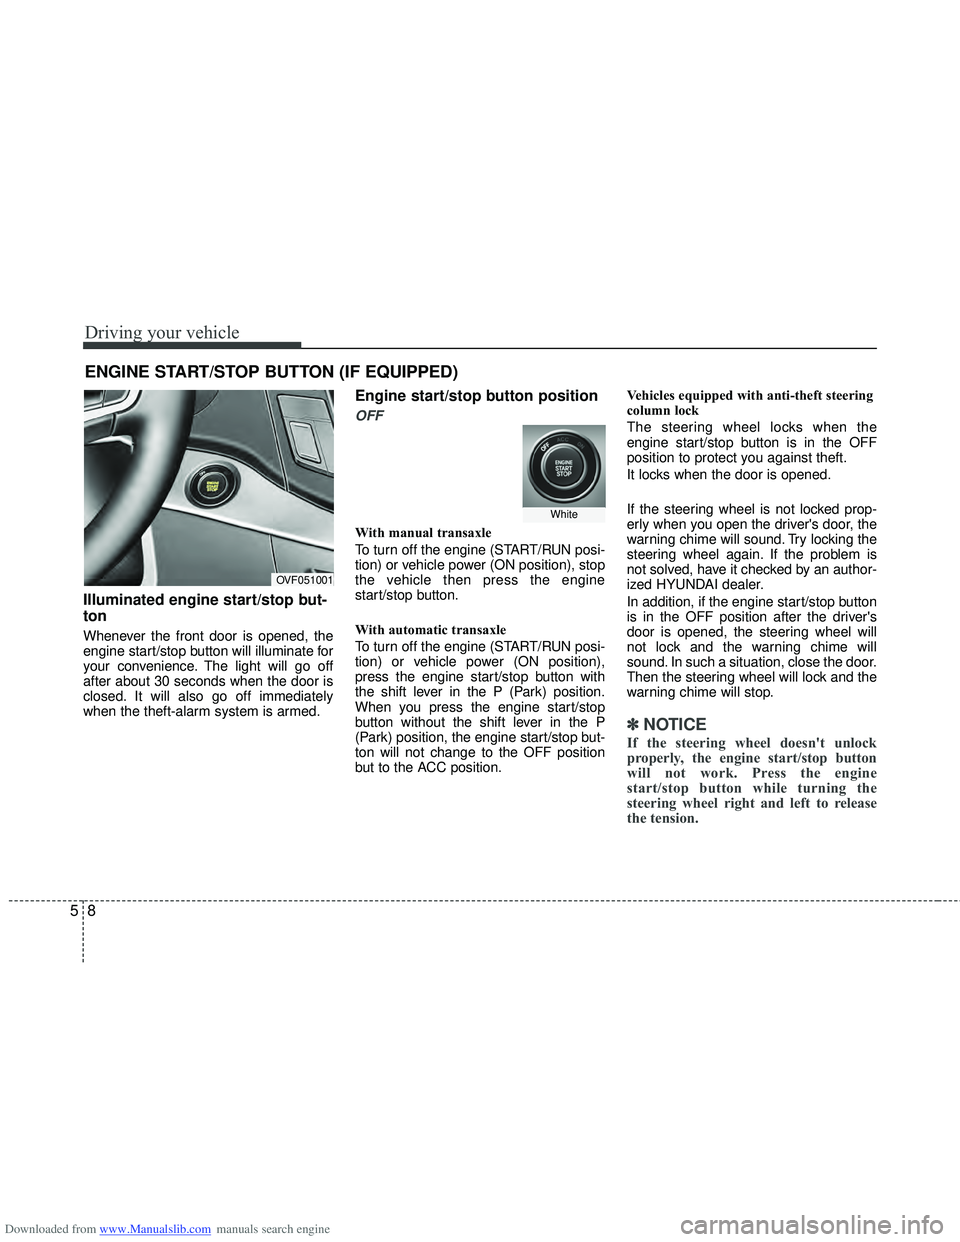 HYUNDAI I40 2014  Owners Manual Downloaded from www.Manualslib.com manuals search engine Driving your vehicle
85
ENGINE START/STOP BUTTON (IF EQUIPPED)
Illuminated engine start/stop but-
ton
Whenever the front door is opened, the
en